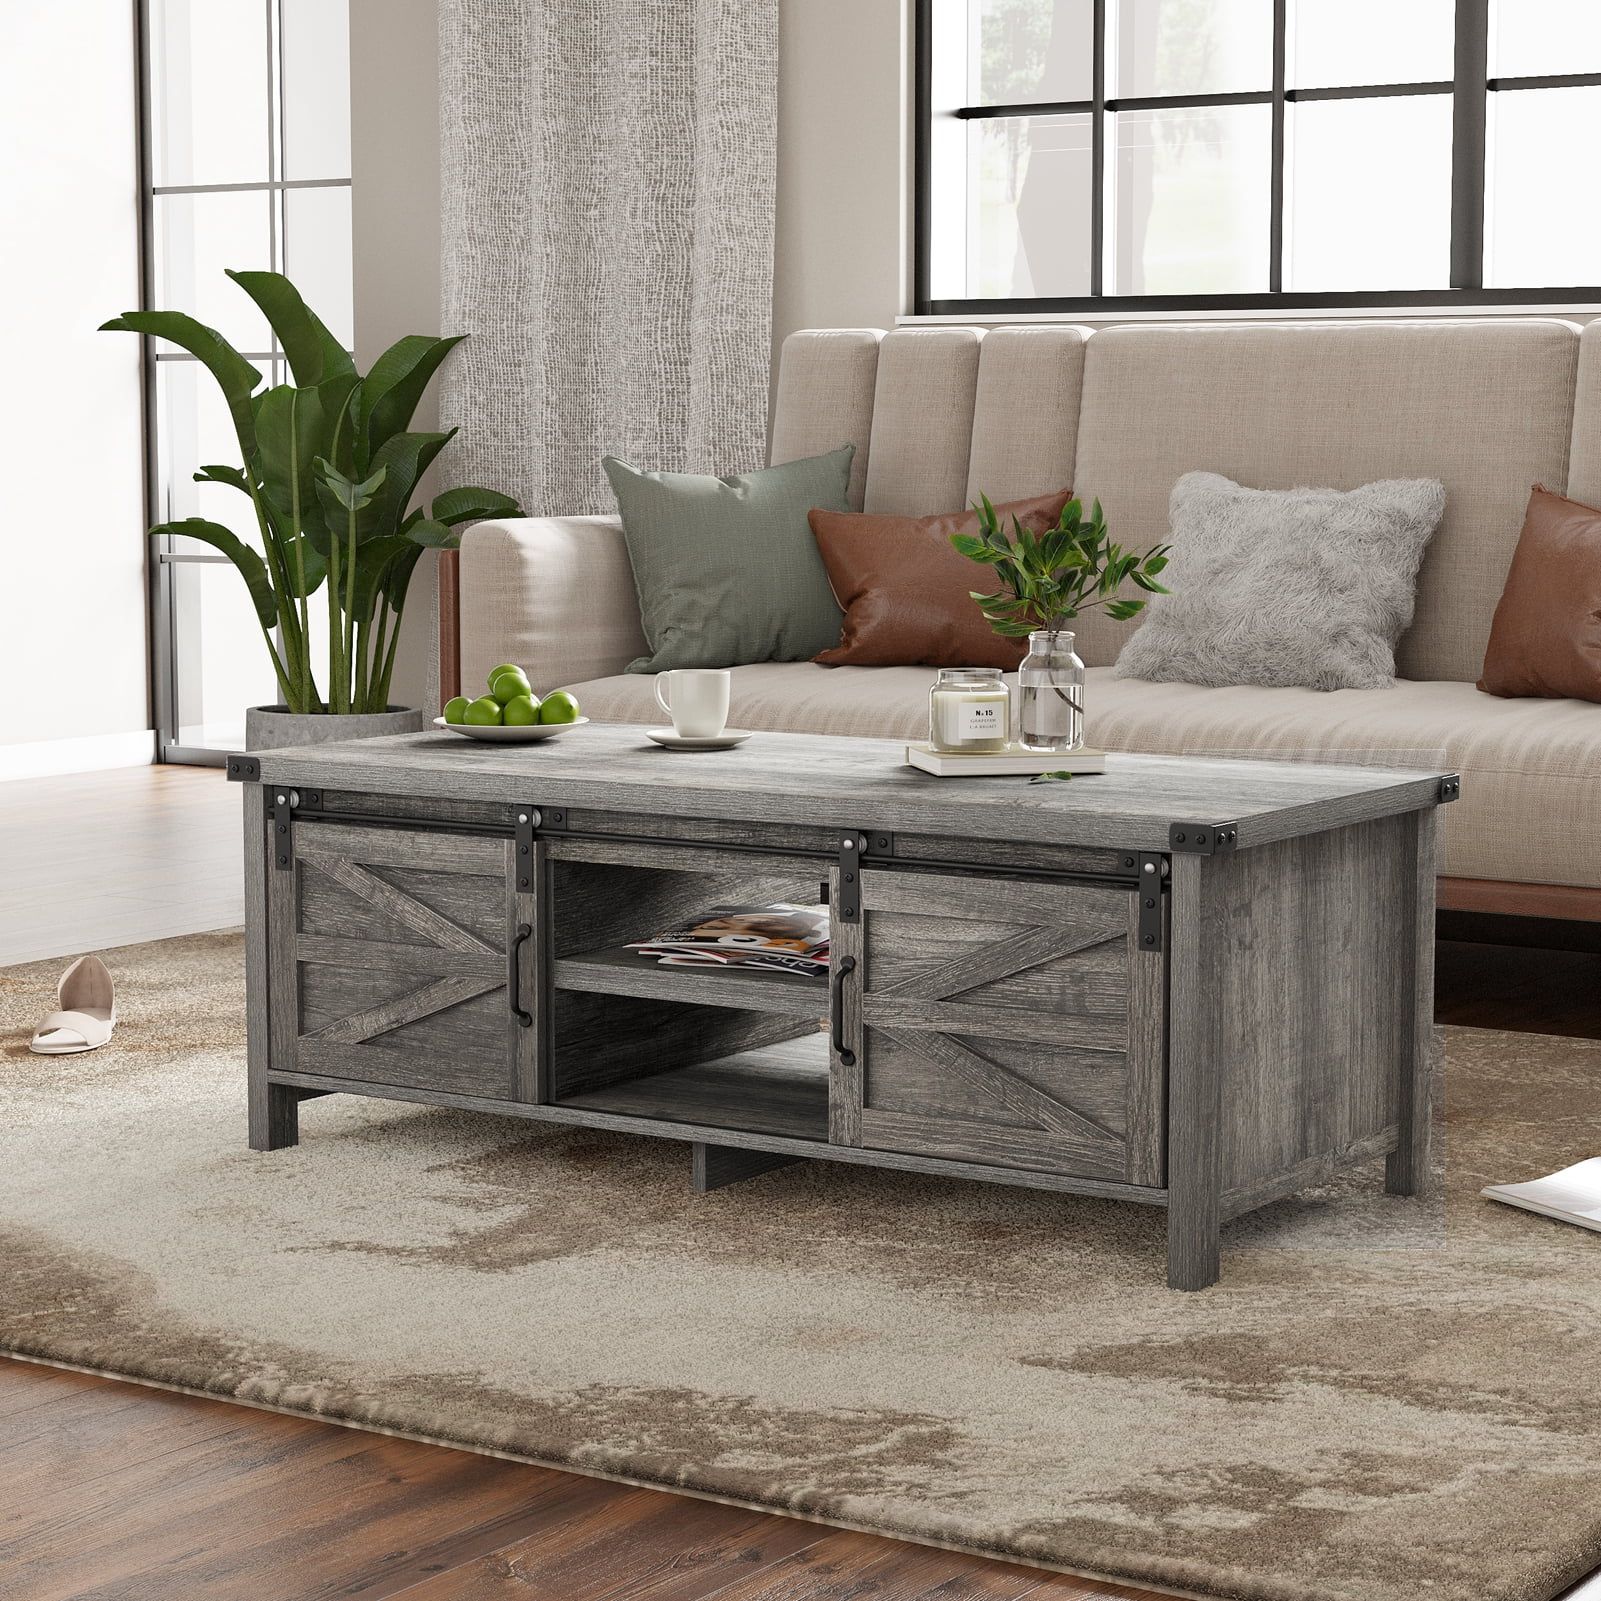 Yaoping 48" Modern Farmhouse Coffee Table With Adjustable Storage Cabinets  Shelves, Modern Coffee Table For Living Room With Sliding Barn Door –  Walmart In Coffee Tables With Sliding Barn Doors (Photo 7 of 15)